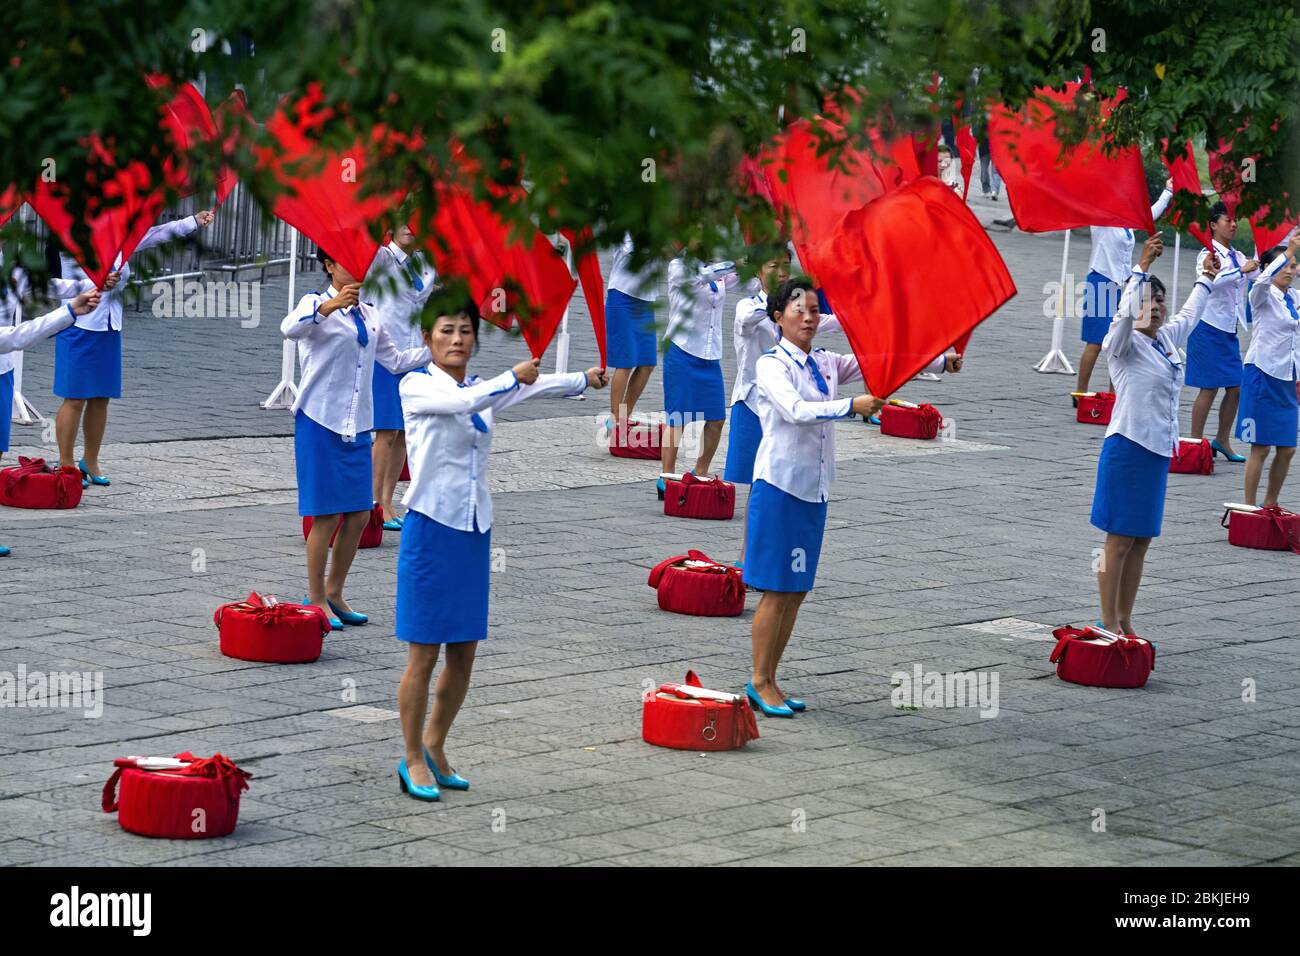 North Korea, Pyongyang, jobless women cheering for the people working Stock Photo